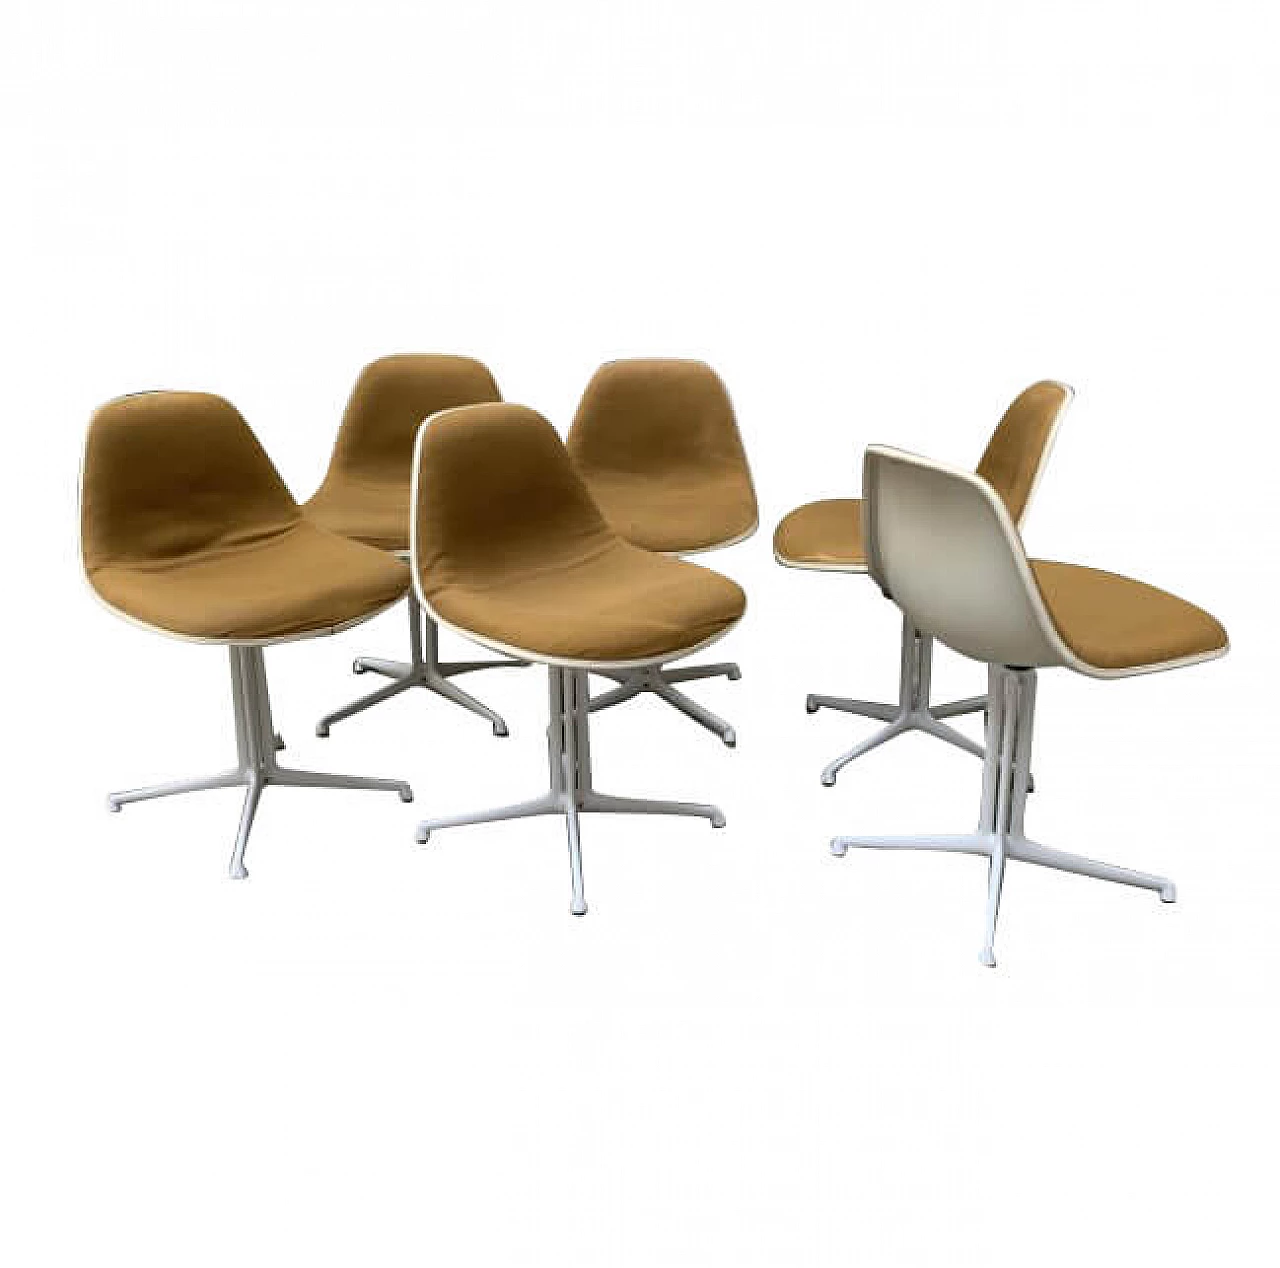 6 La Fonda chairs by Charles & Ray Eames for Herman Miller, 60s 1241159